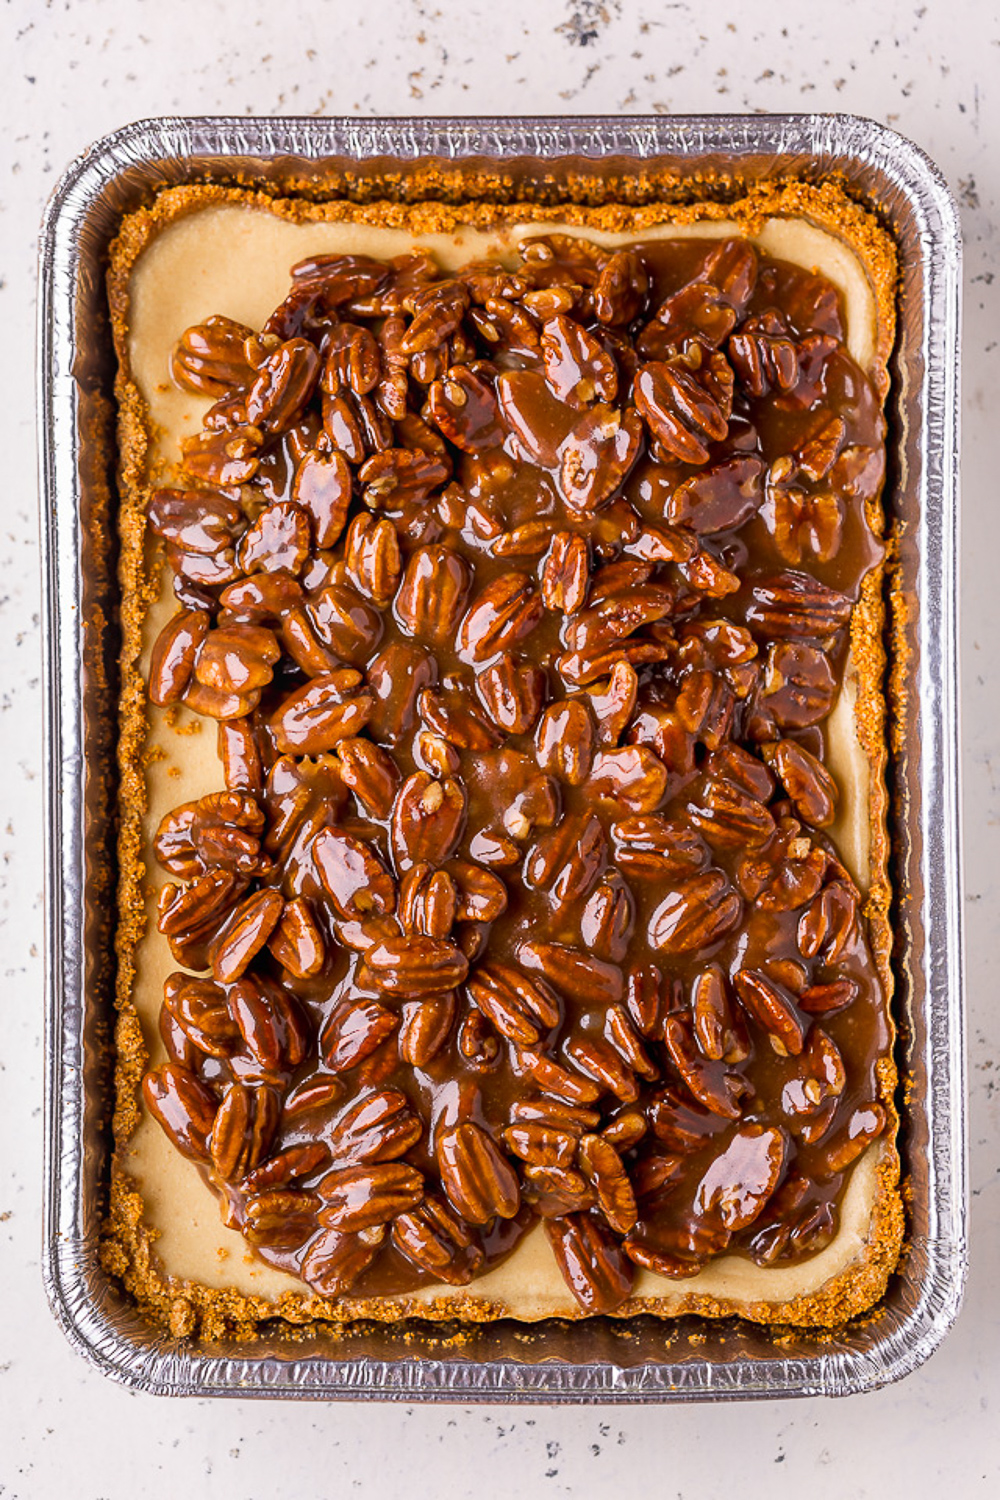 19 perfect pecan recipes you'll want to make over and over again this season!